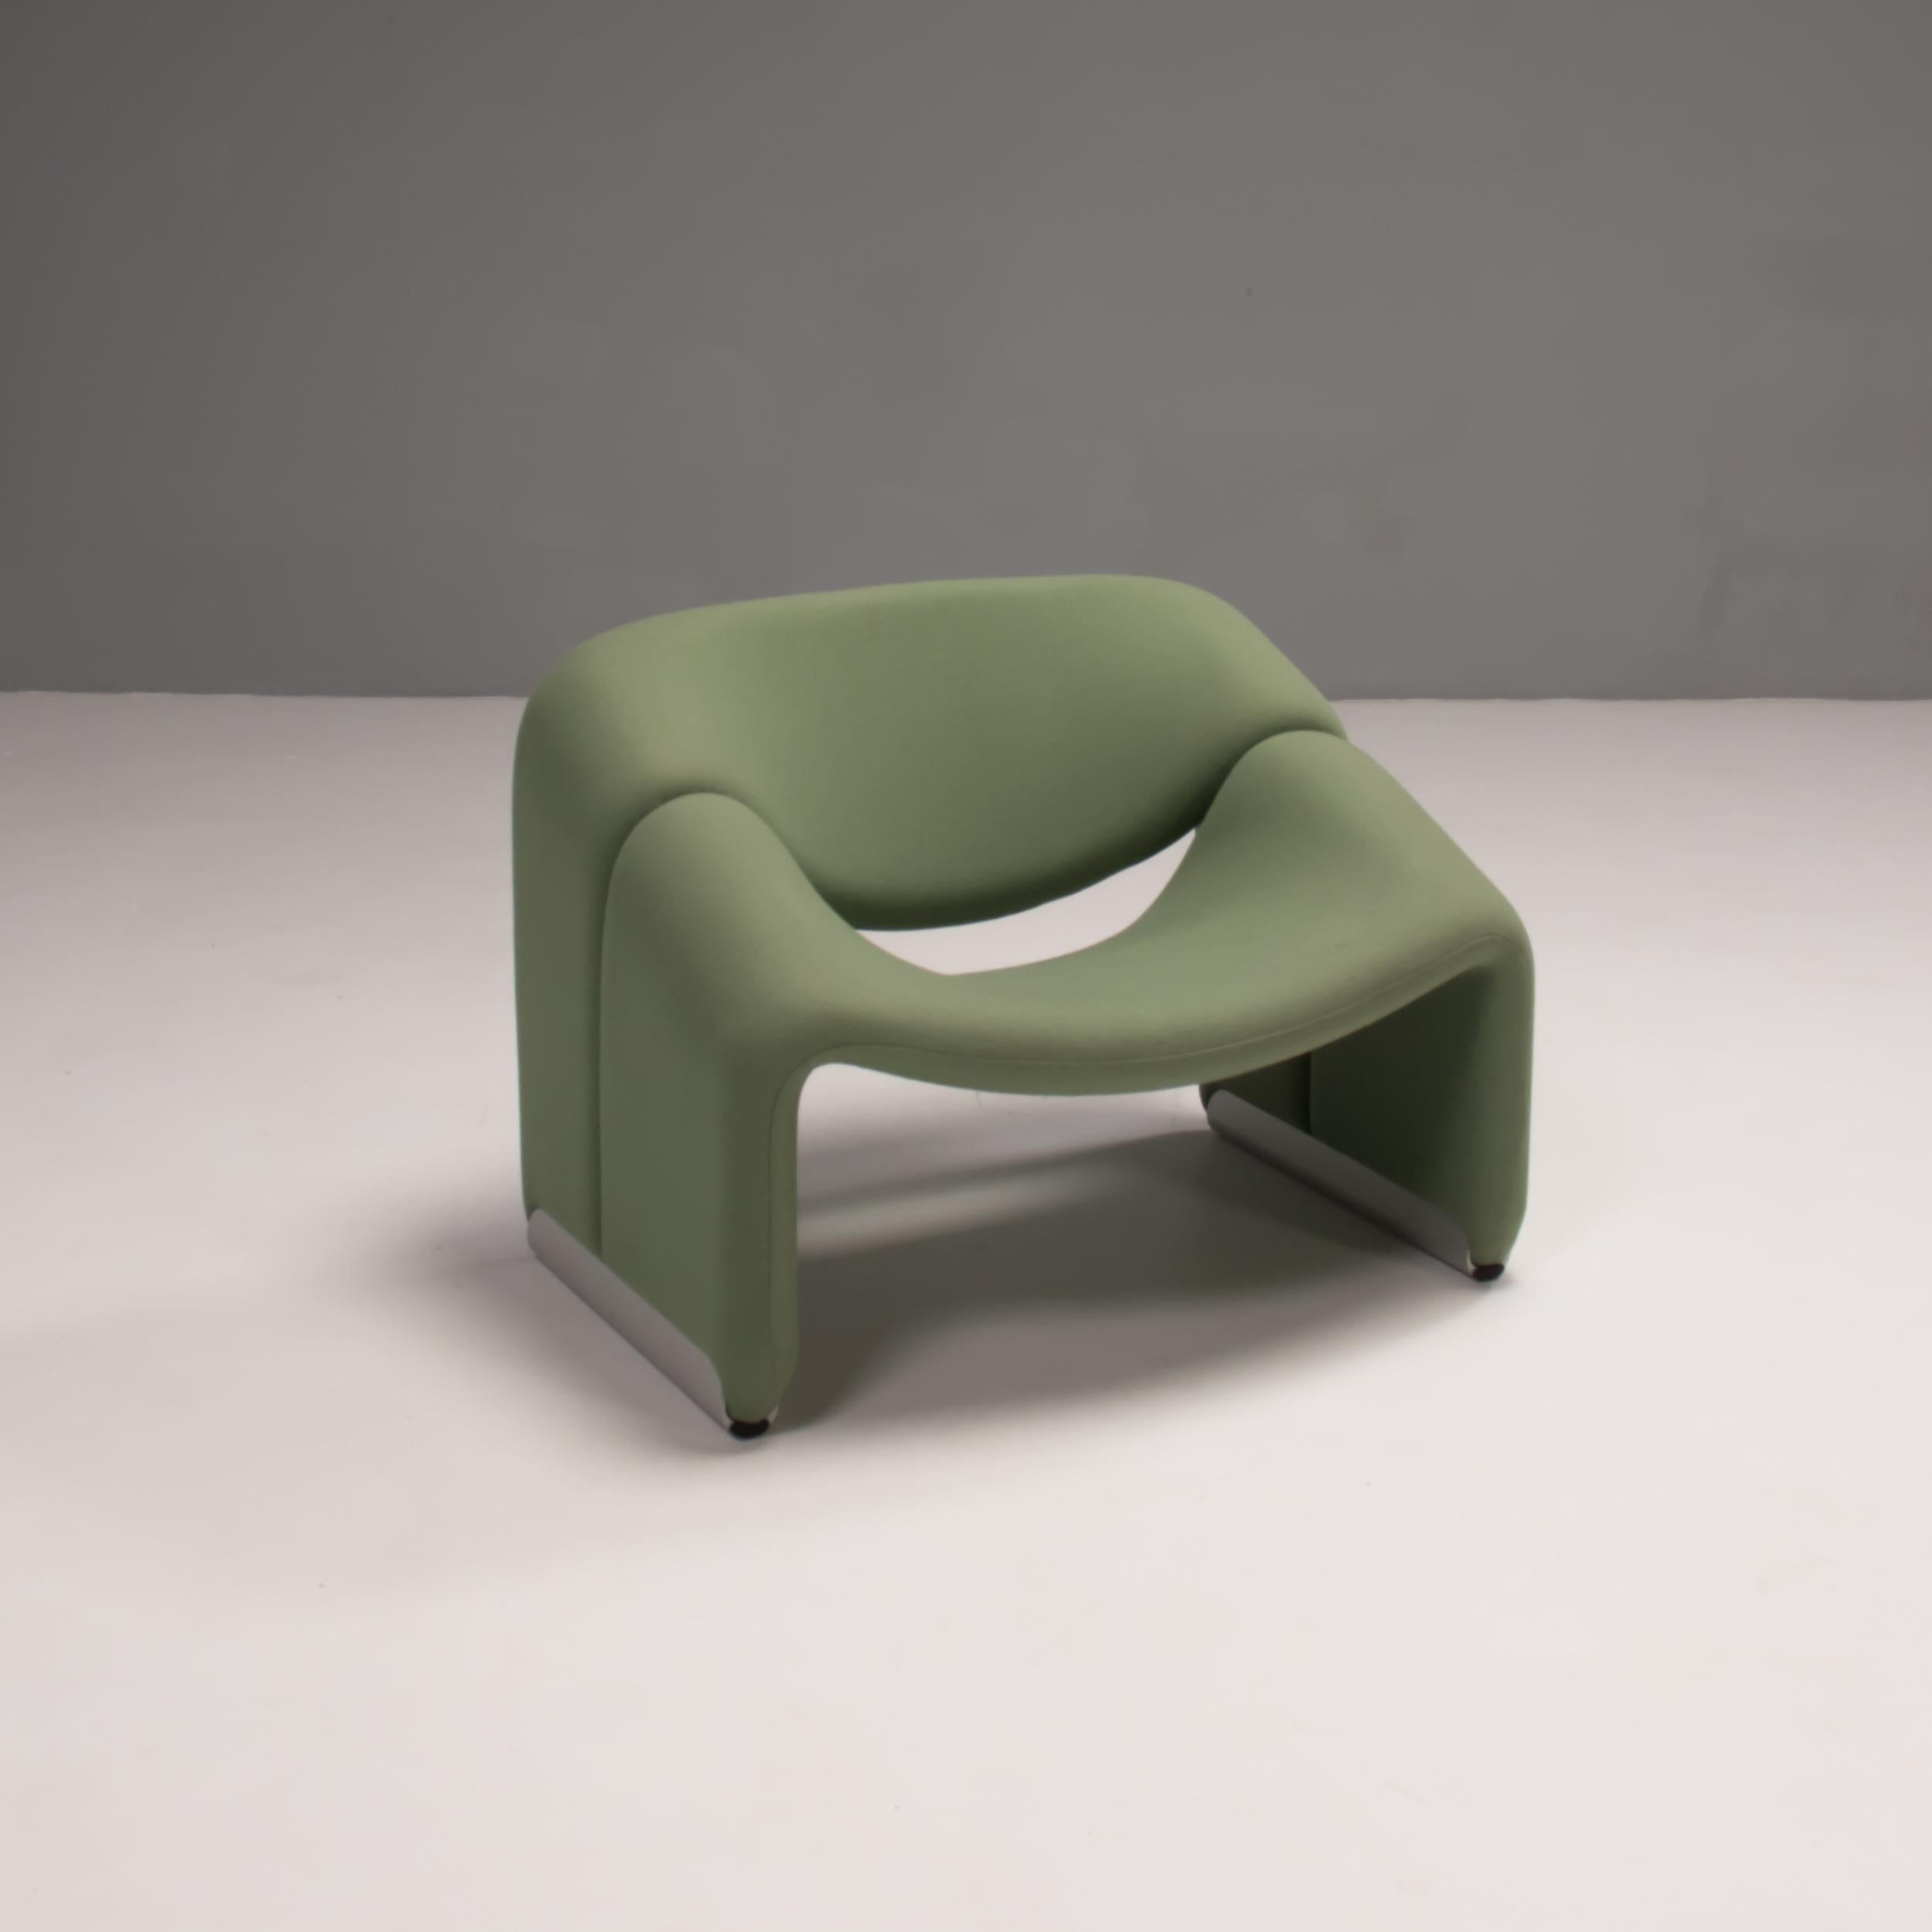 Originally designed by Pierre Paulin in 1973 the F598 chair is now known as the Groovy chair referring to its iconic curvy silhouette.

Manufactured by Artifort, these chairs feature a sculptural shape with the legs curving seamlessly into the seat